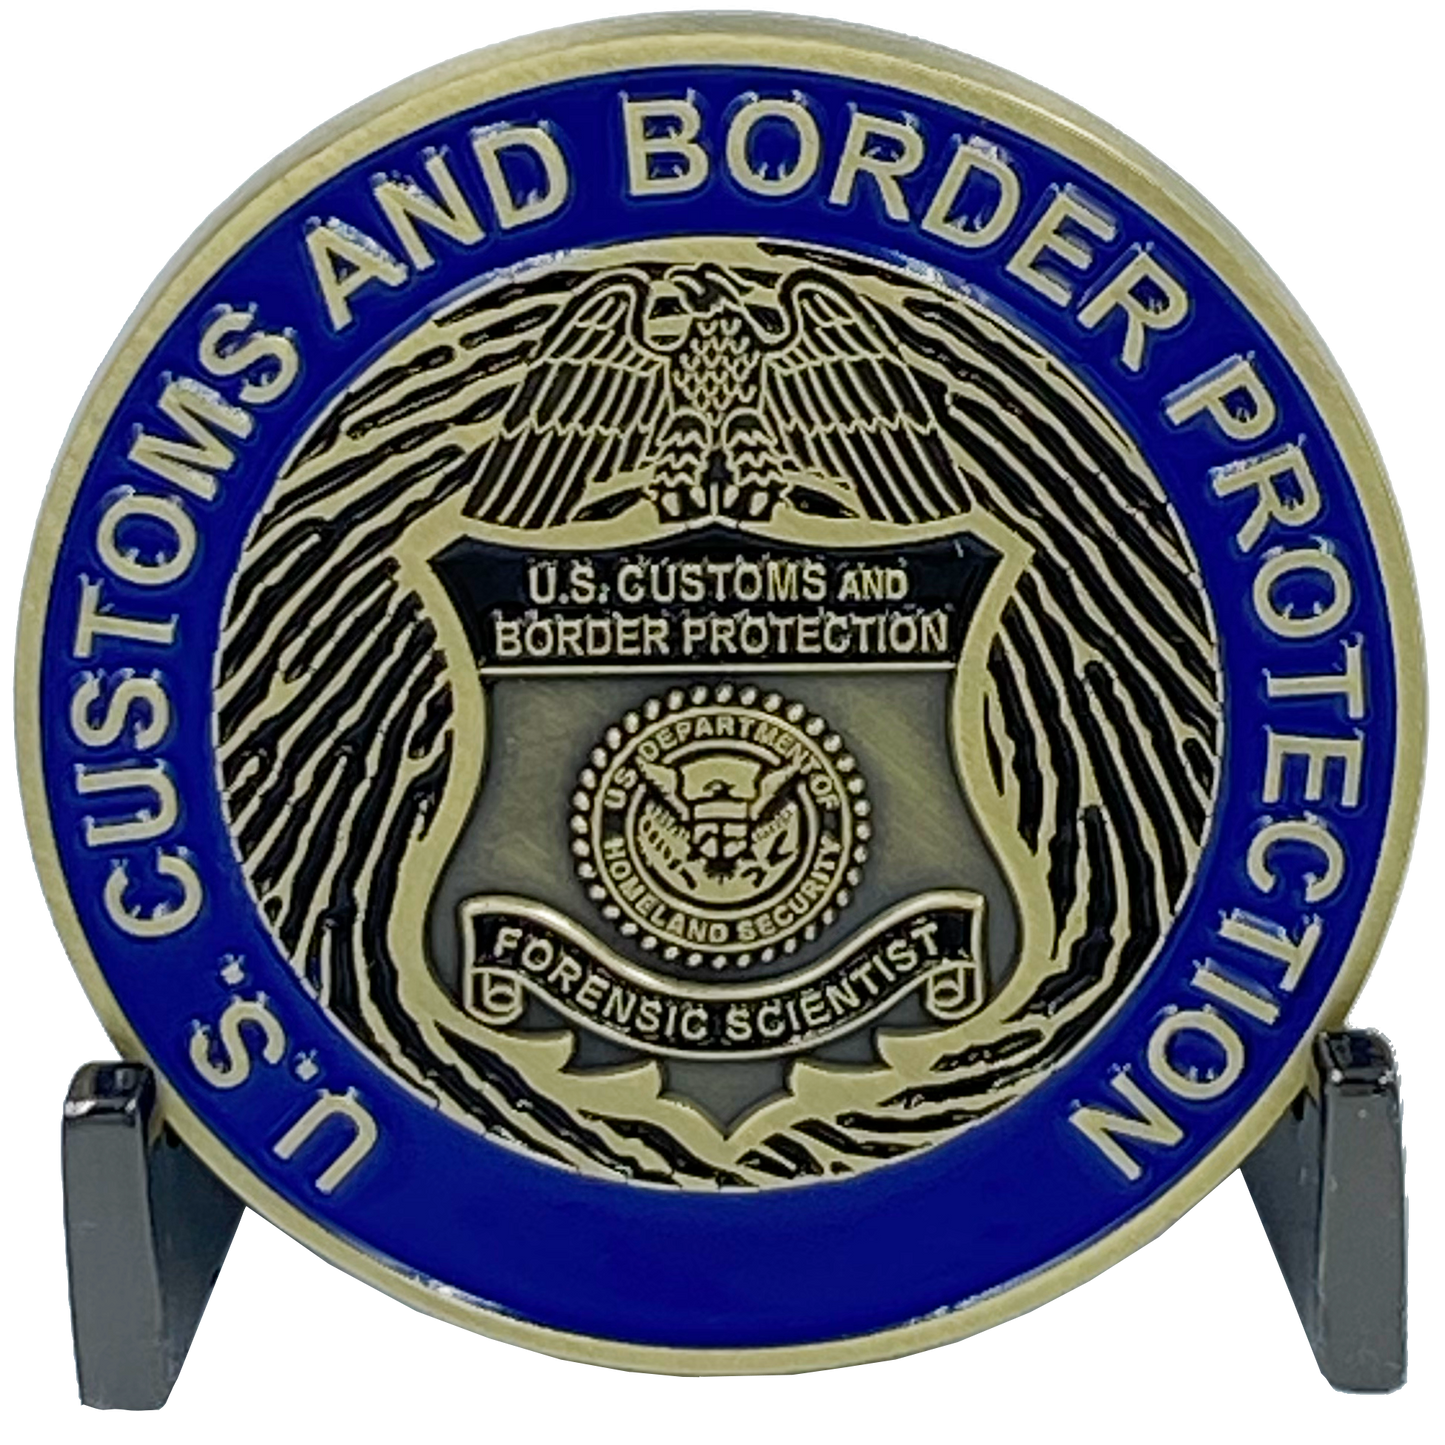 DL7-06 CBP Forensics Scientist Laboratories and Scientific Services Border Patrol Field Operations AMO Challenge Coin